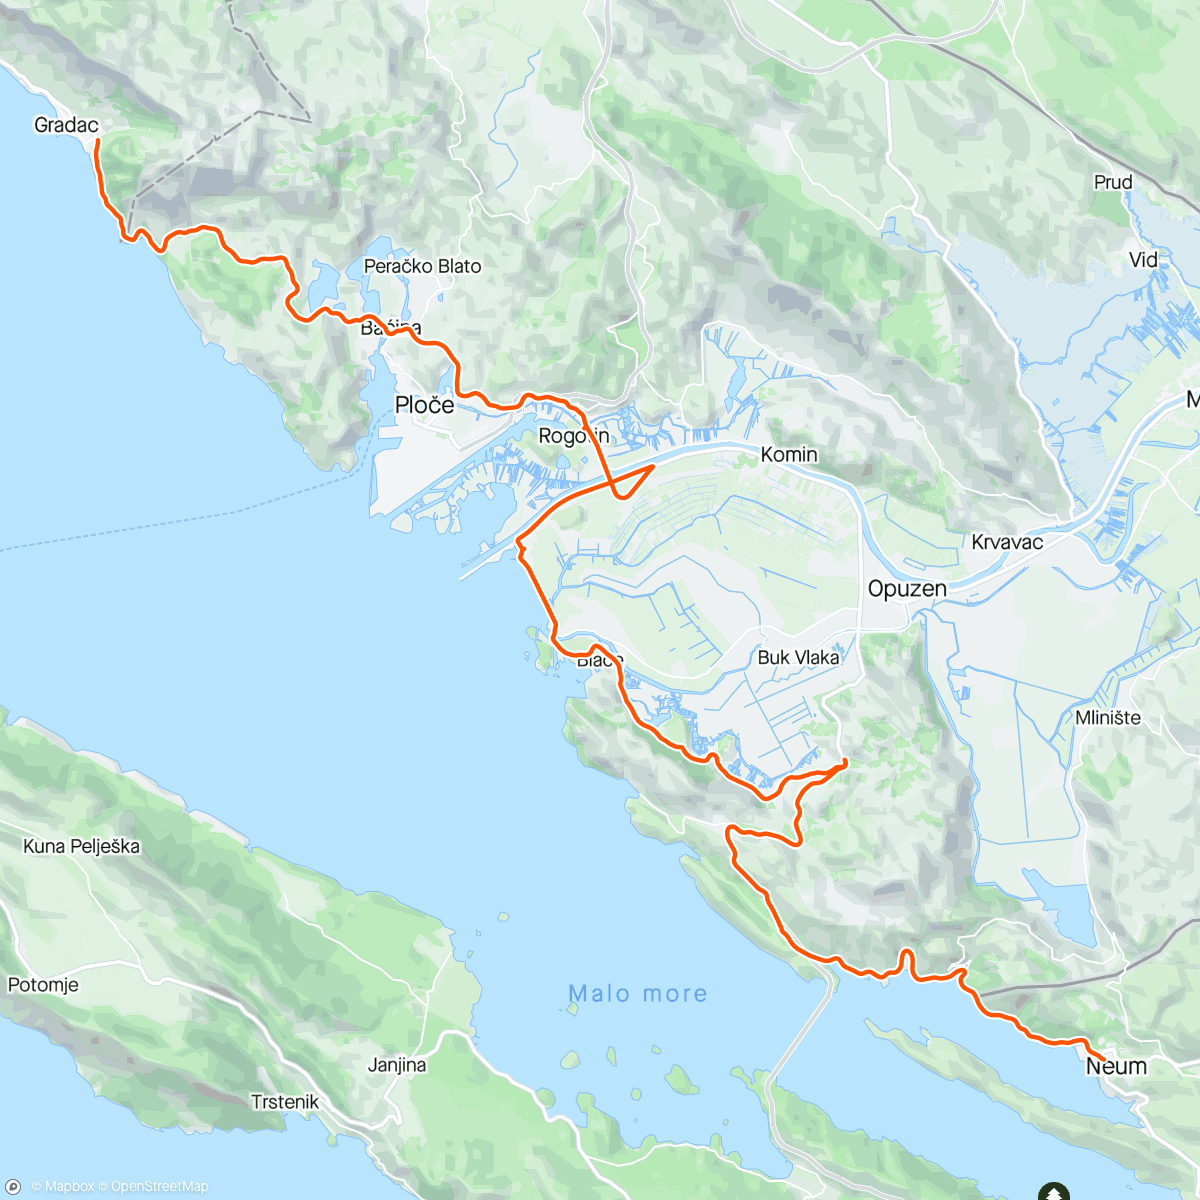 Map of the activity, Day 98: Constant noise coming from rear spokes. At least a new issue every day 😤 A Croatian Tortoise 🐢, Cevapi, and crossed the BIH border 🇧🇦